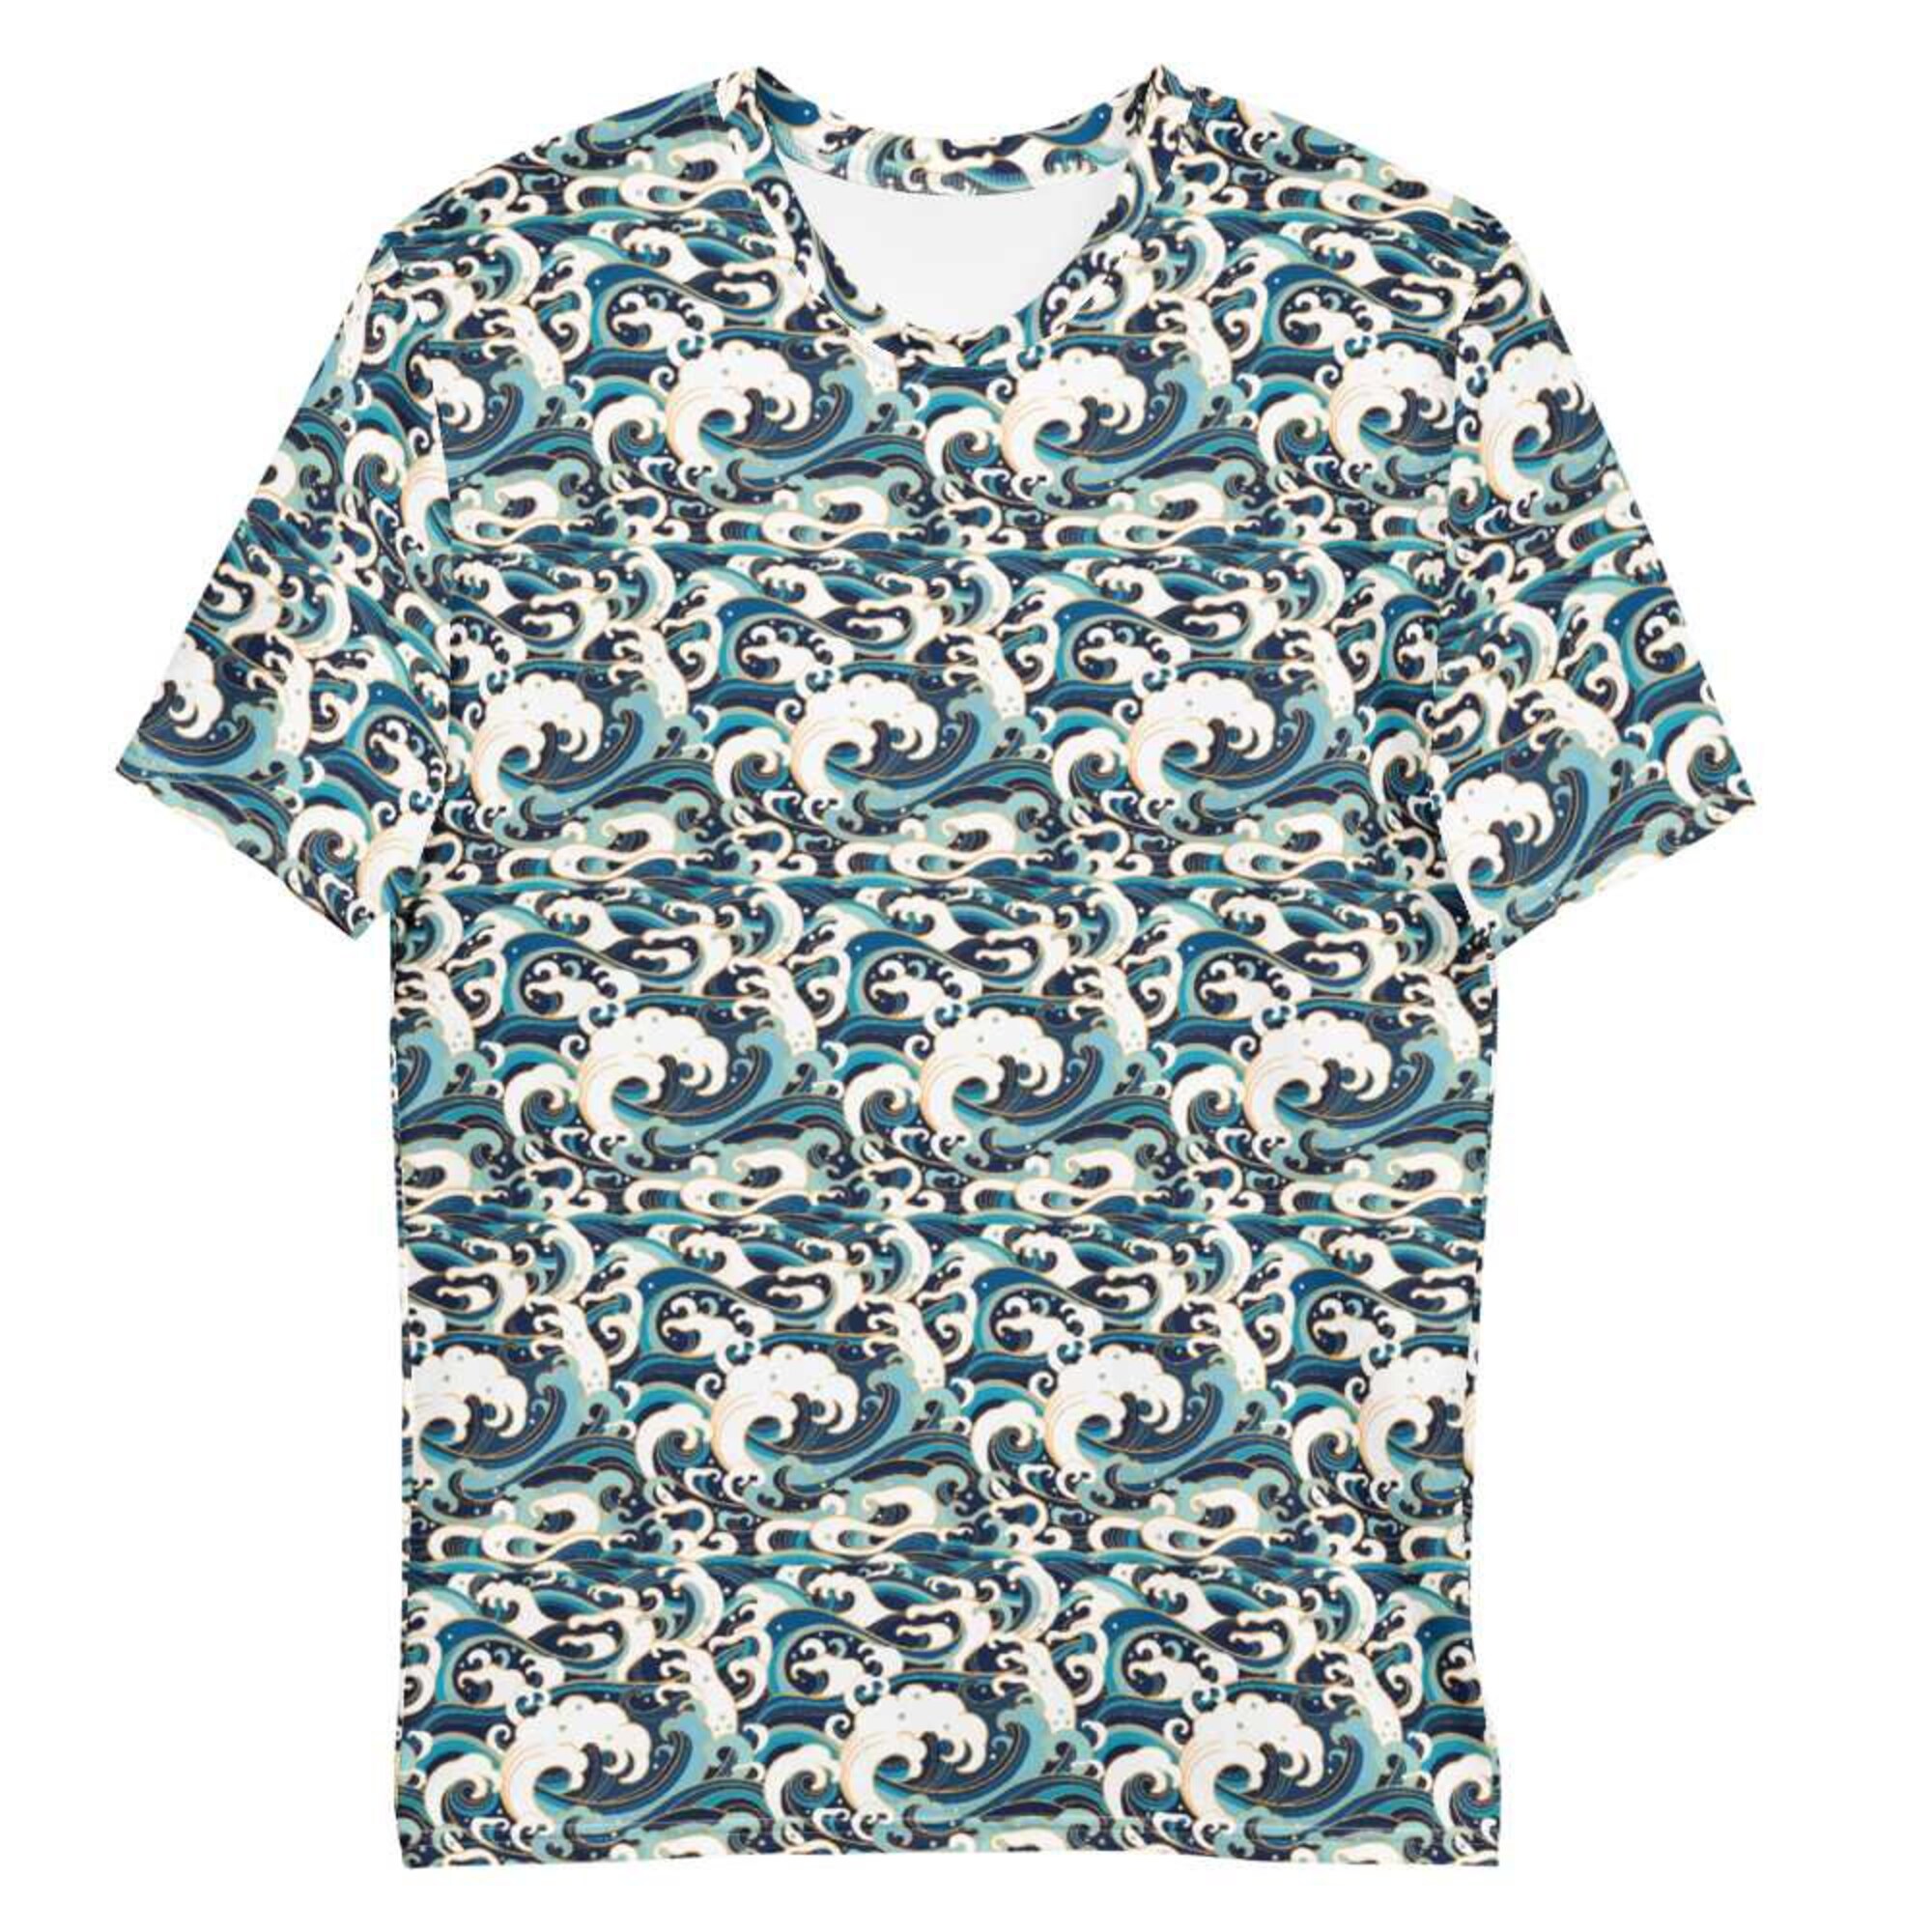 Discover Ocean Waves Pattern T-shirt